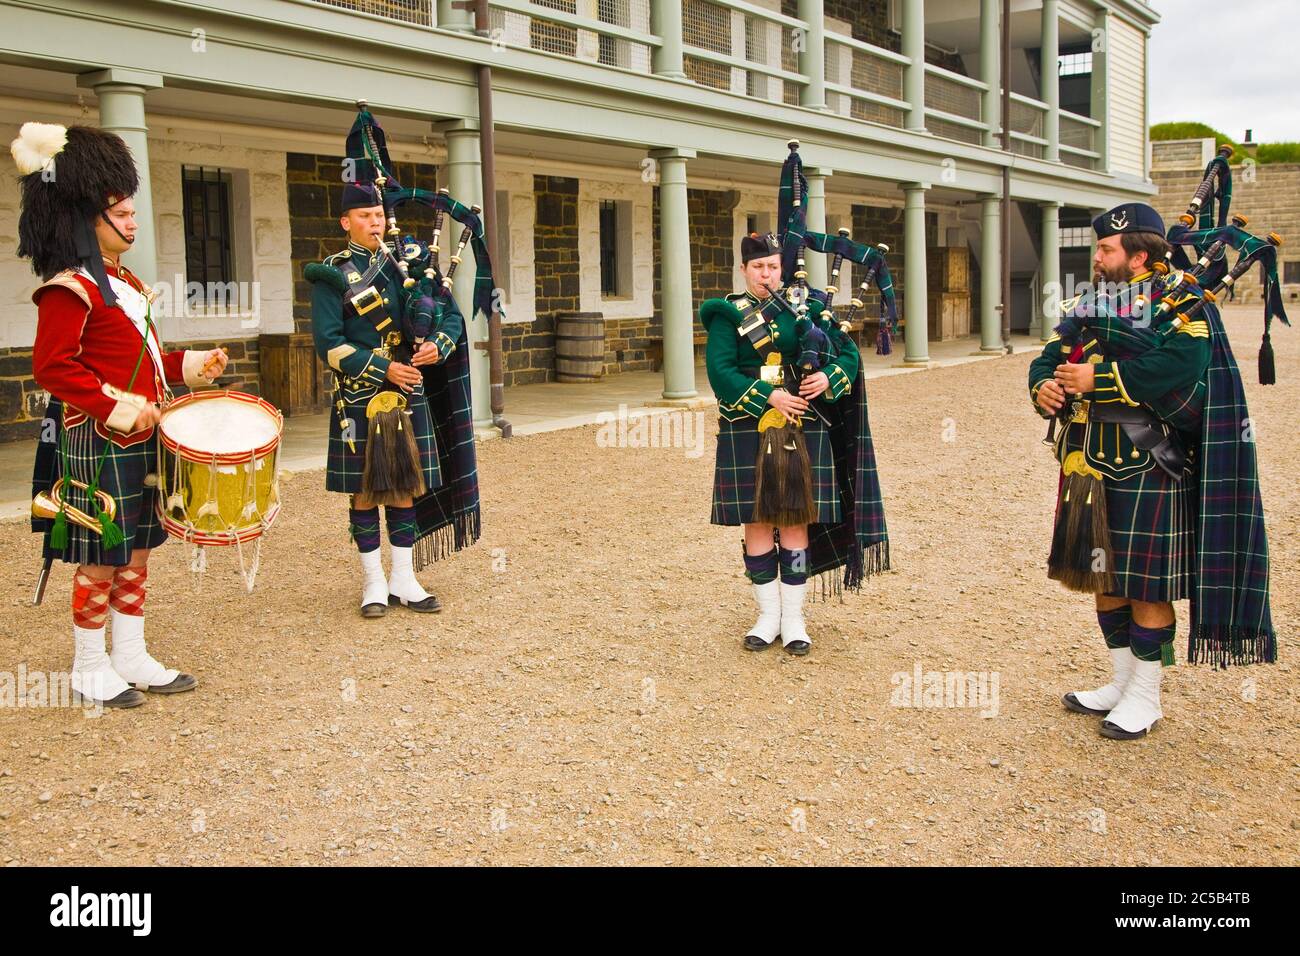 Bagpipe and Drum Corps playing at the Citadel heritage site in Halifax Nova Sctia Canada Stock Photo